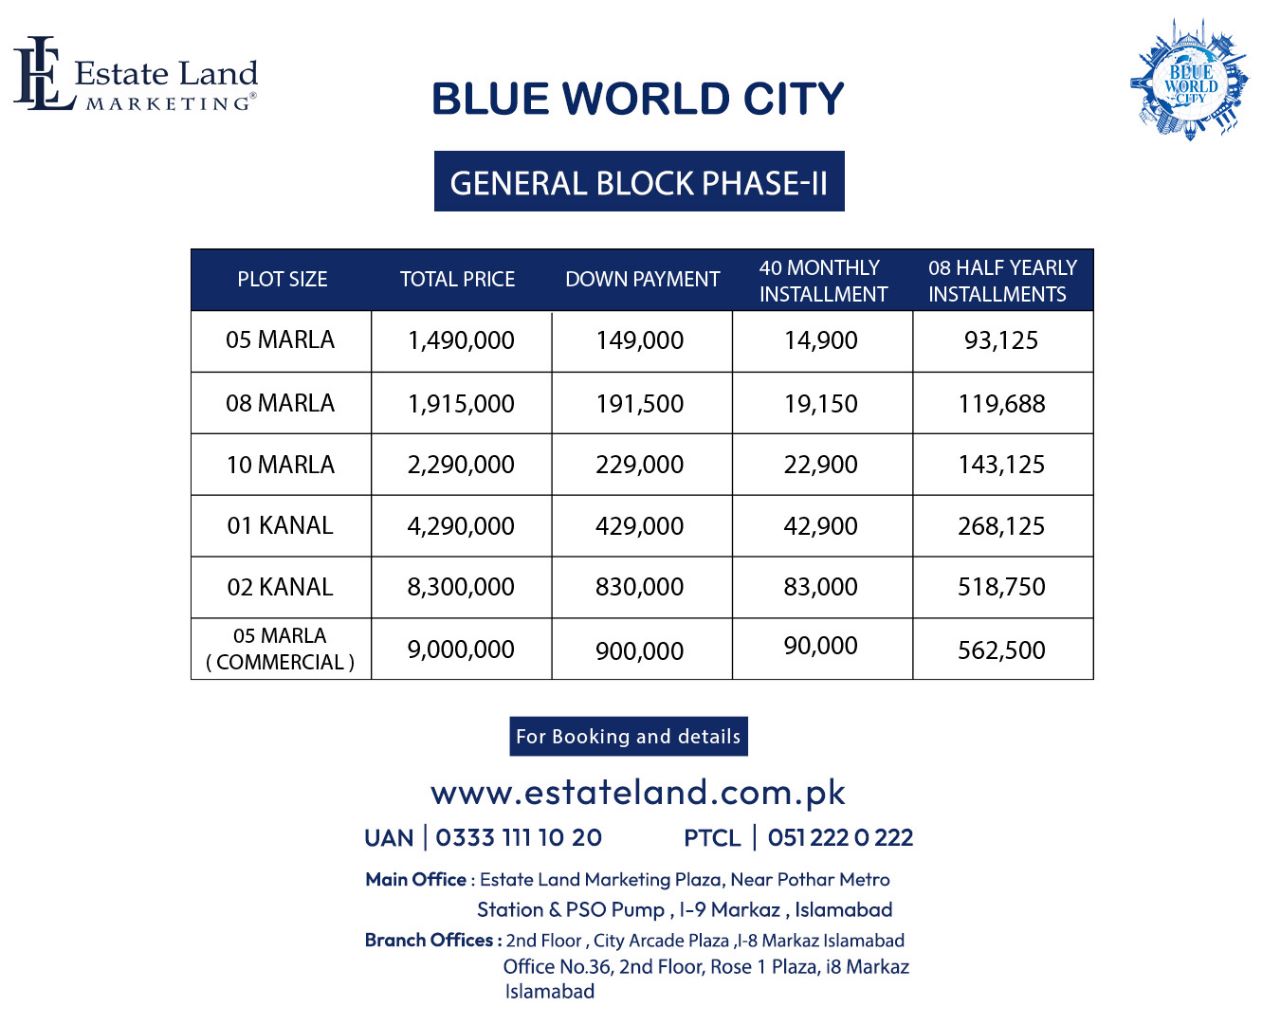 Blue World City General Block Phase 2 Payment Plan